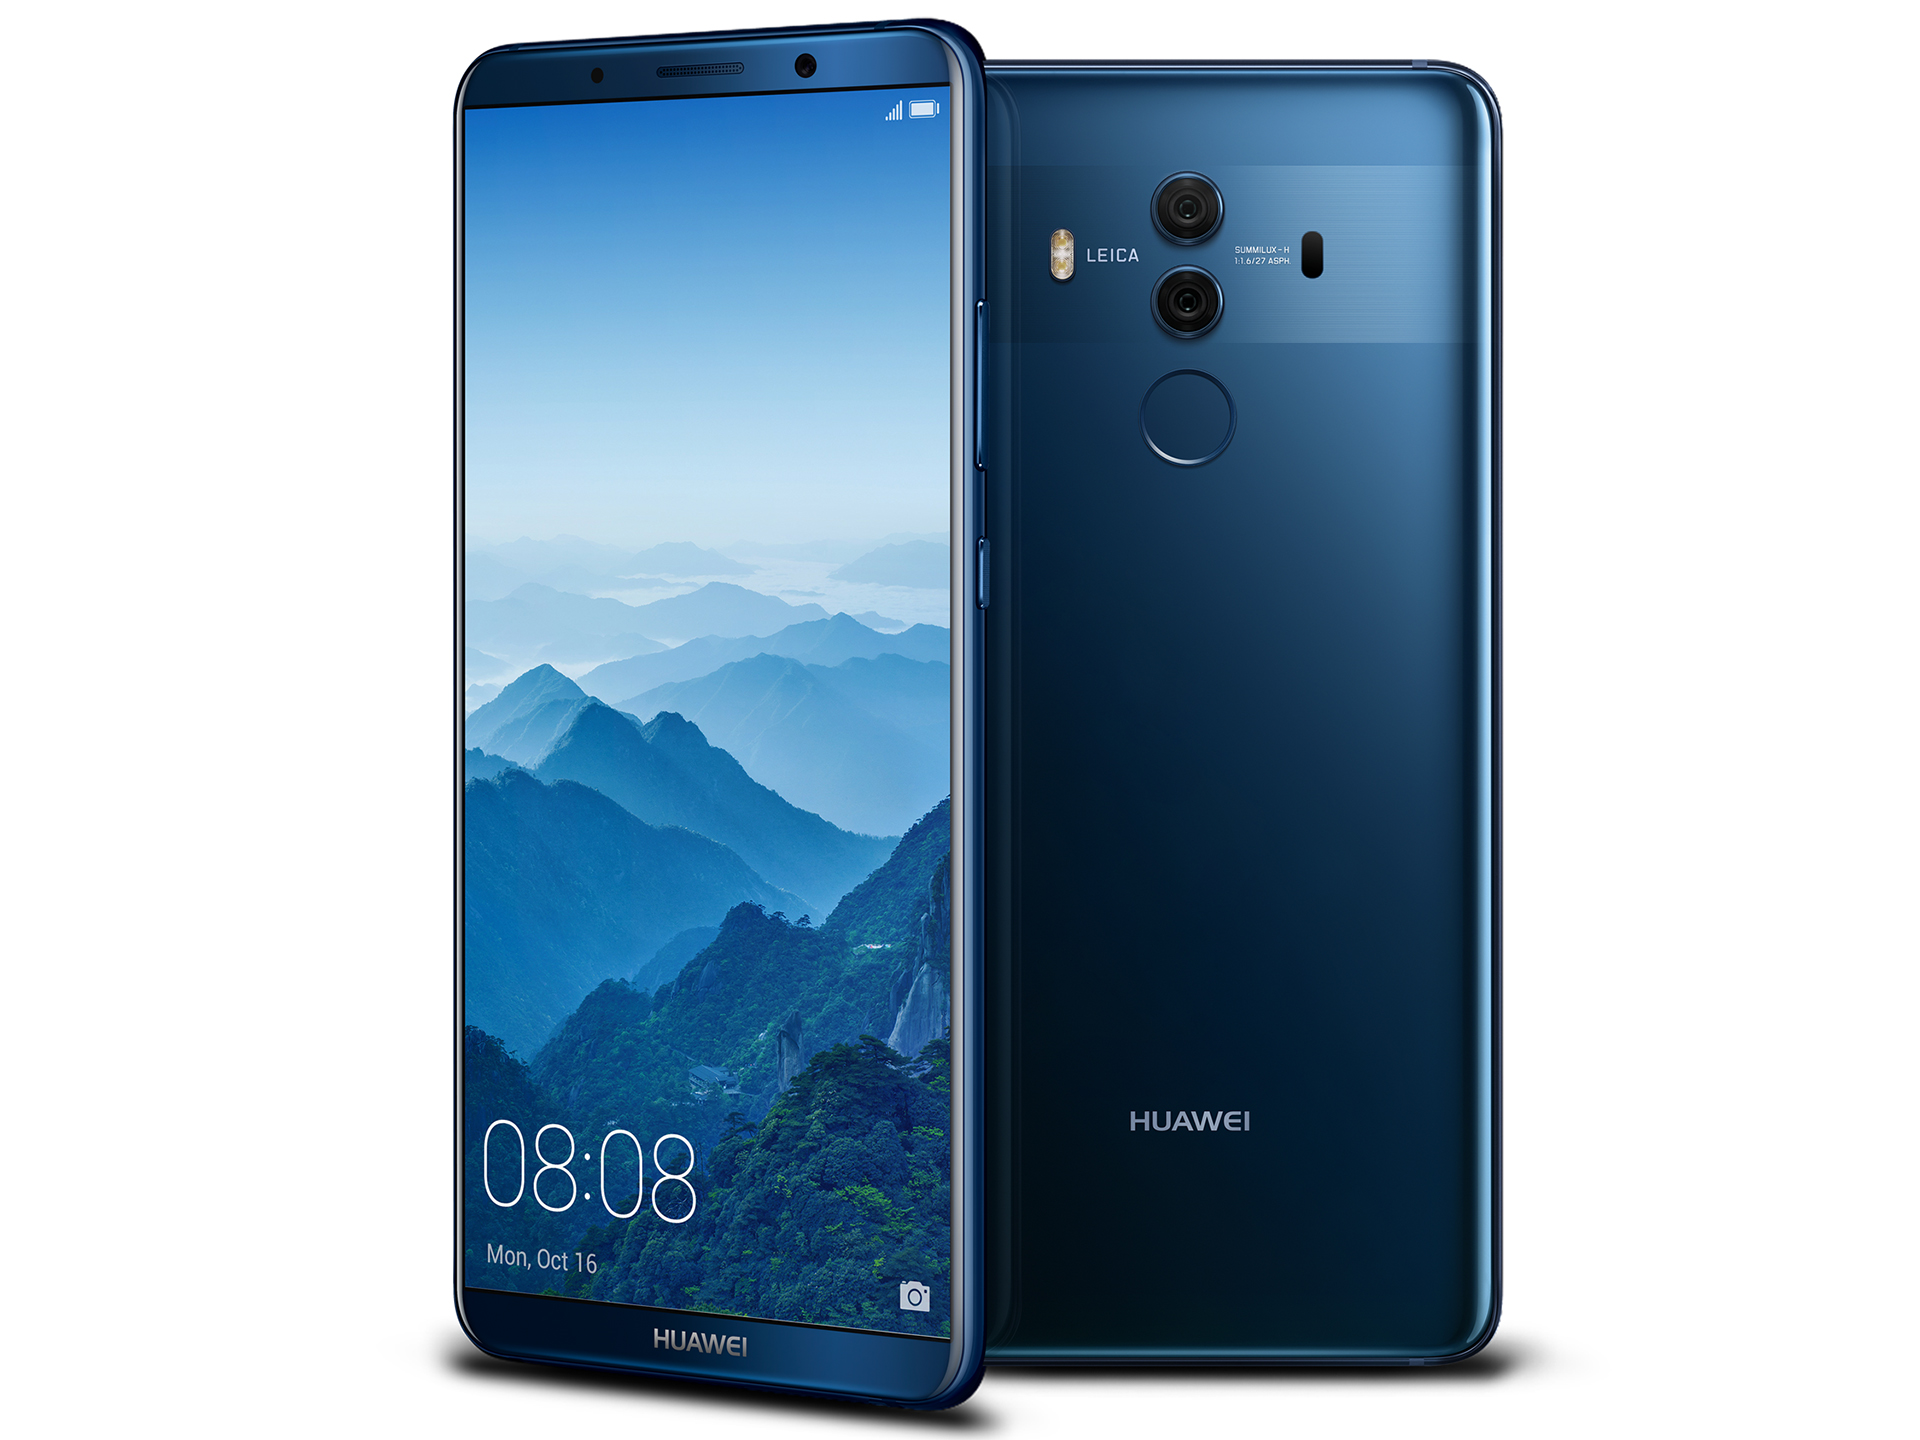 Huawei Mate 10 Pro Smartphone Review - NotebookCheck.net Reviews